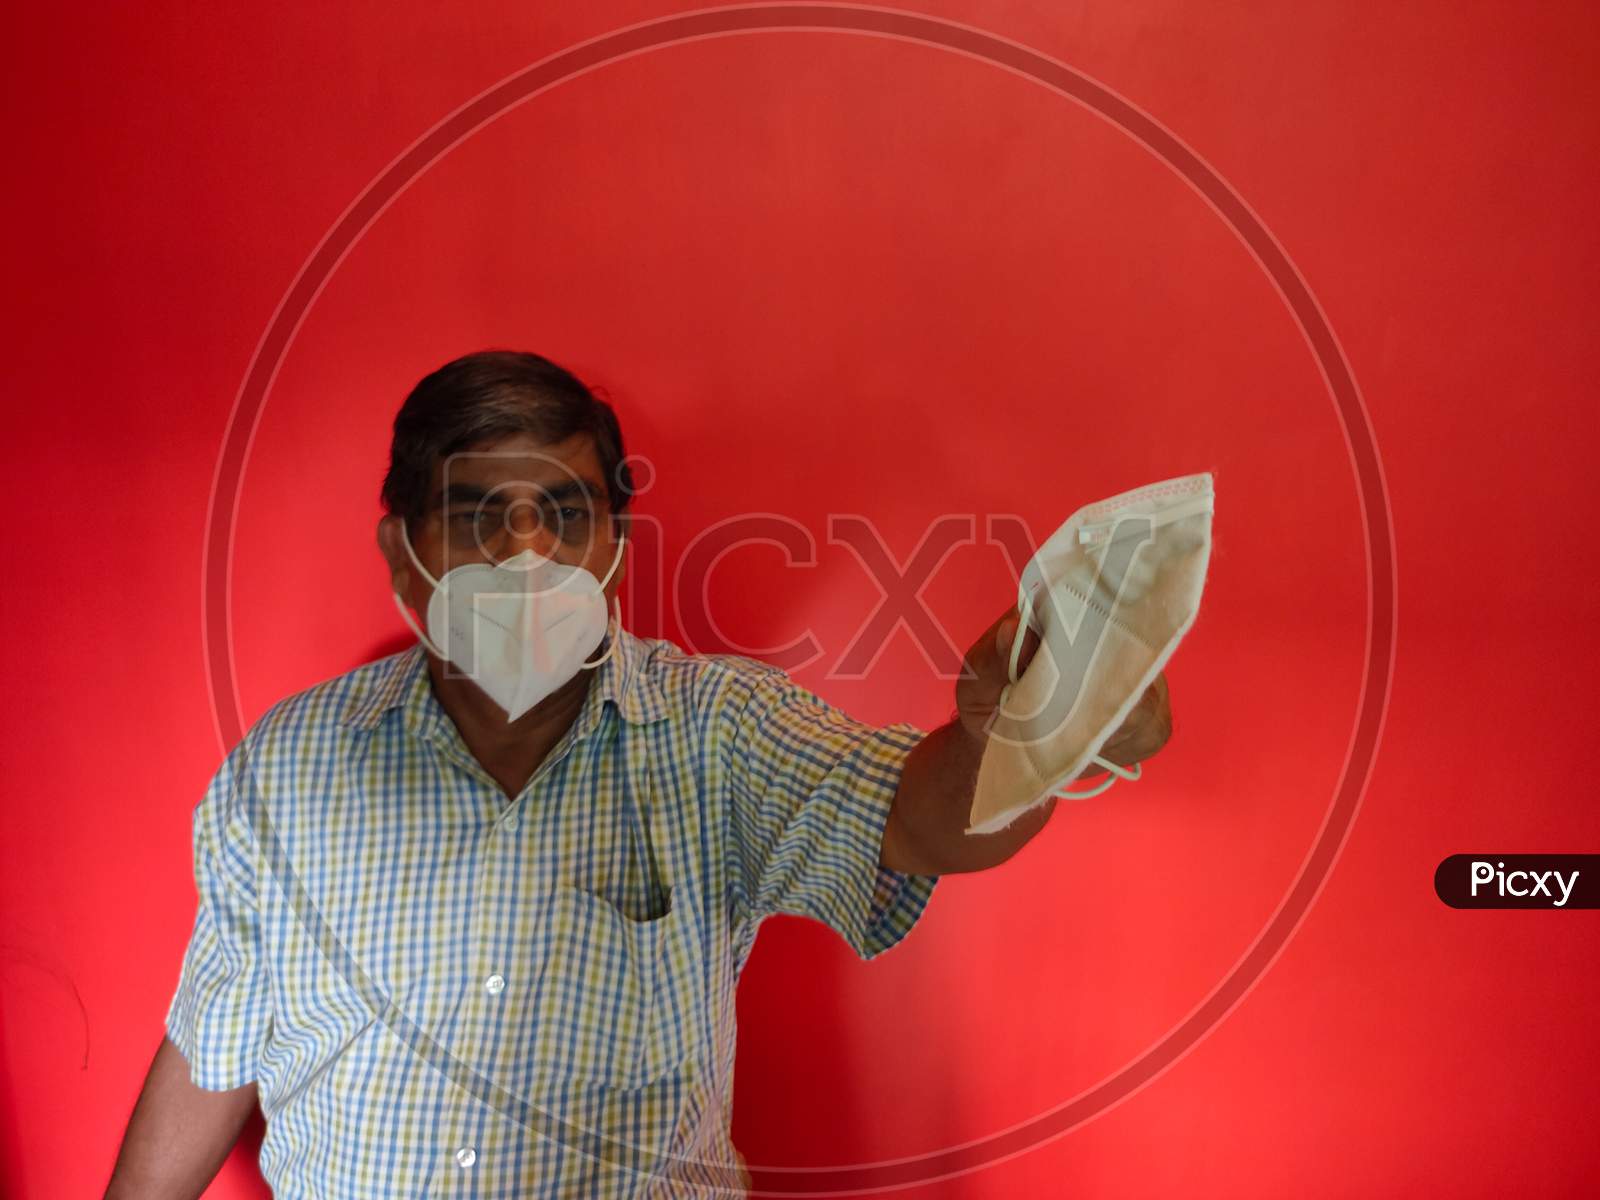 A Old Man Wearing Face Mask & Suggest To Wear Mask For Corona Virus Protection